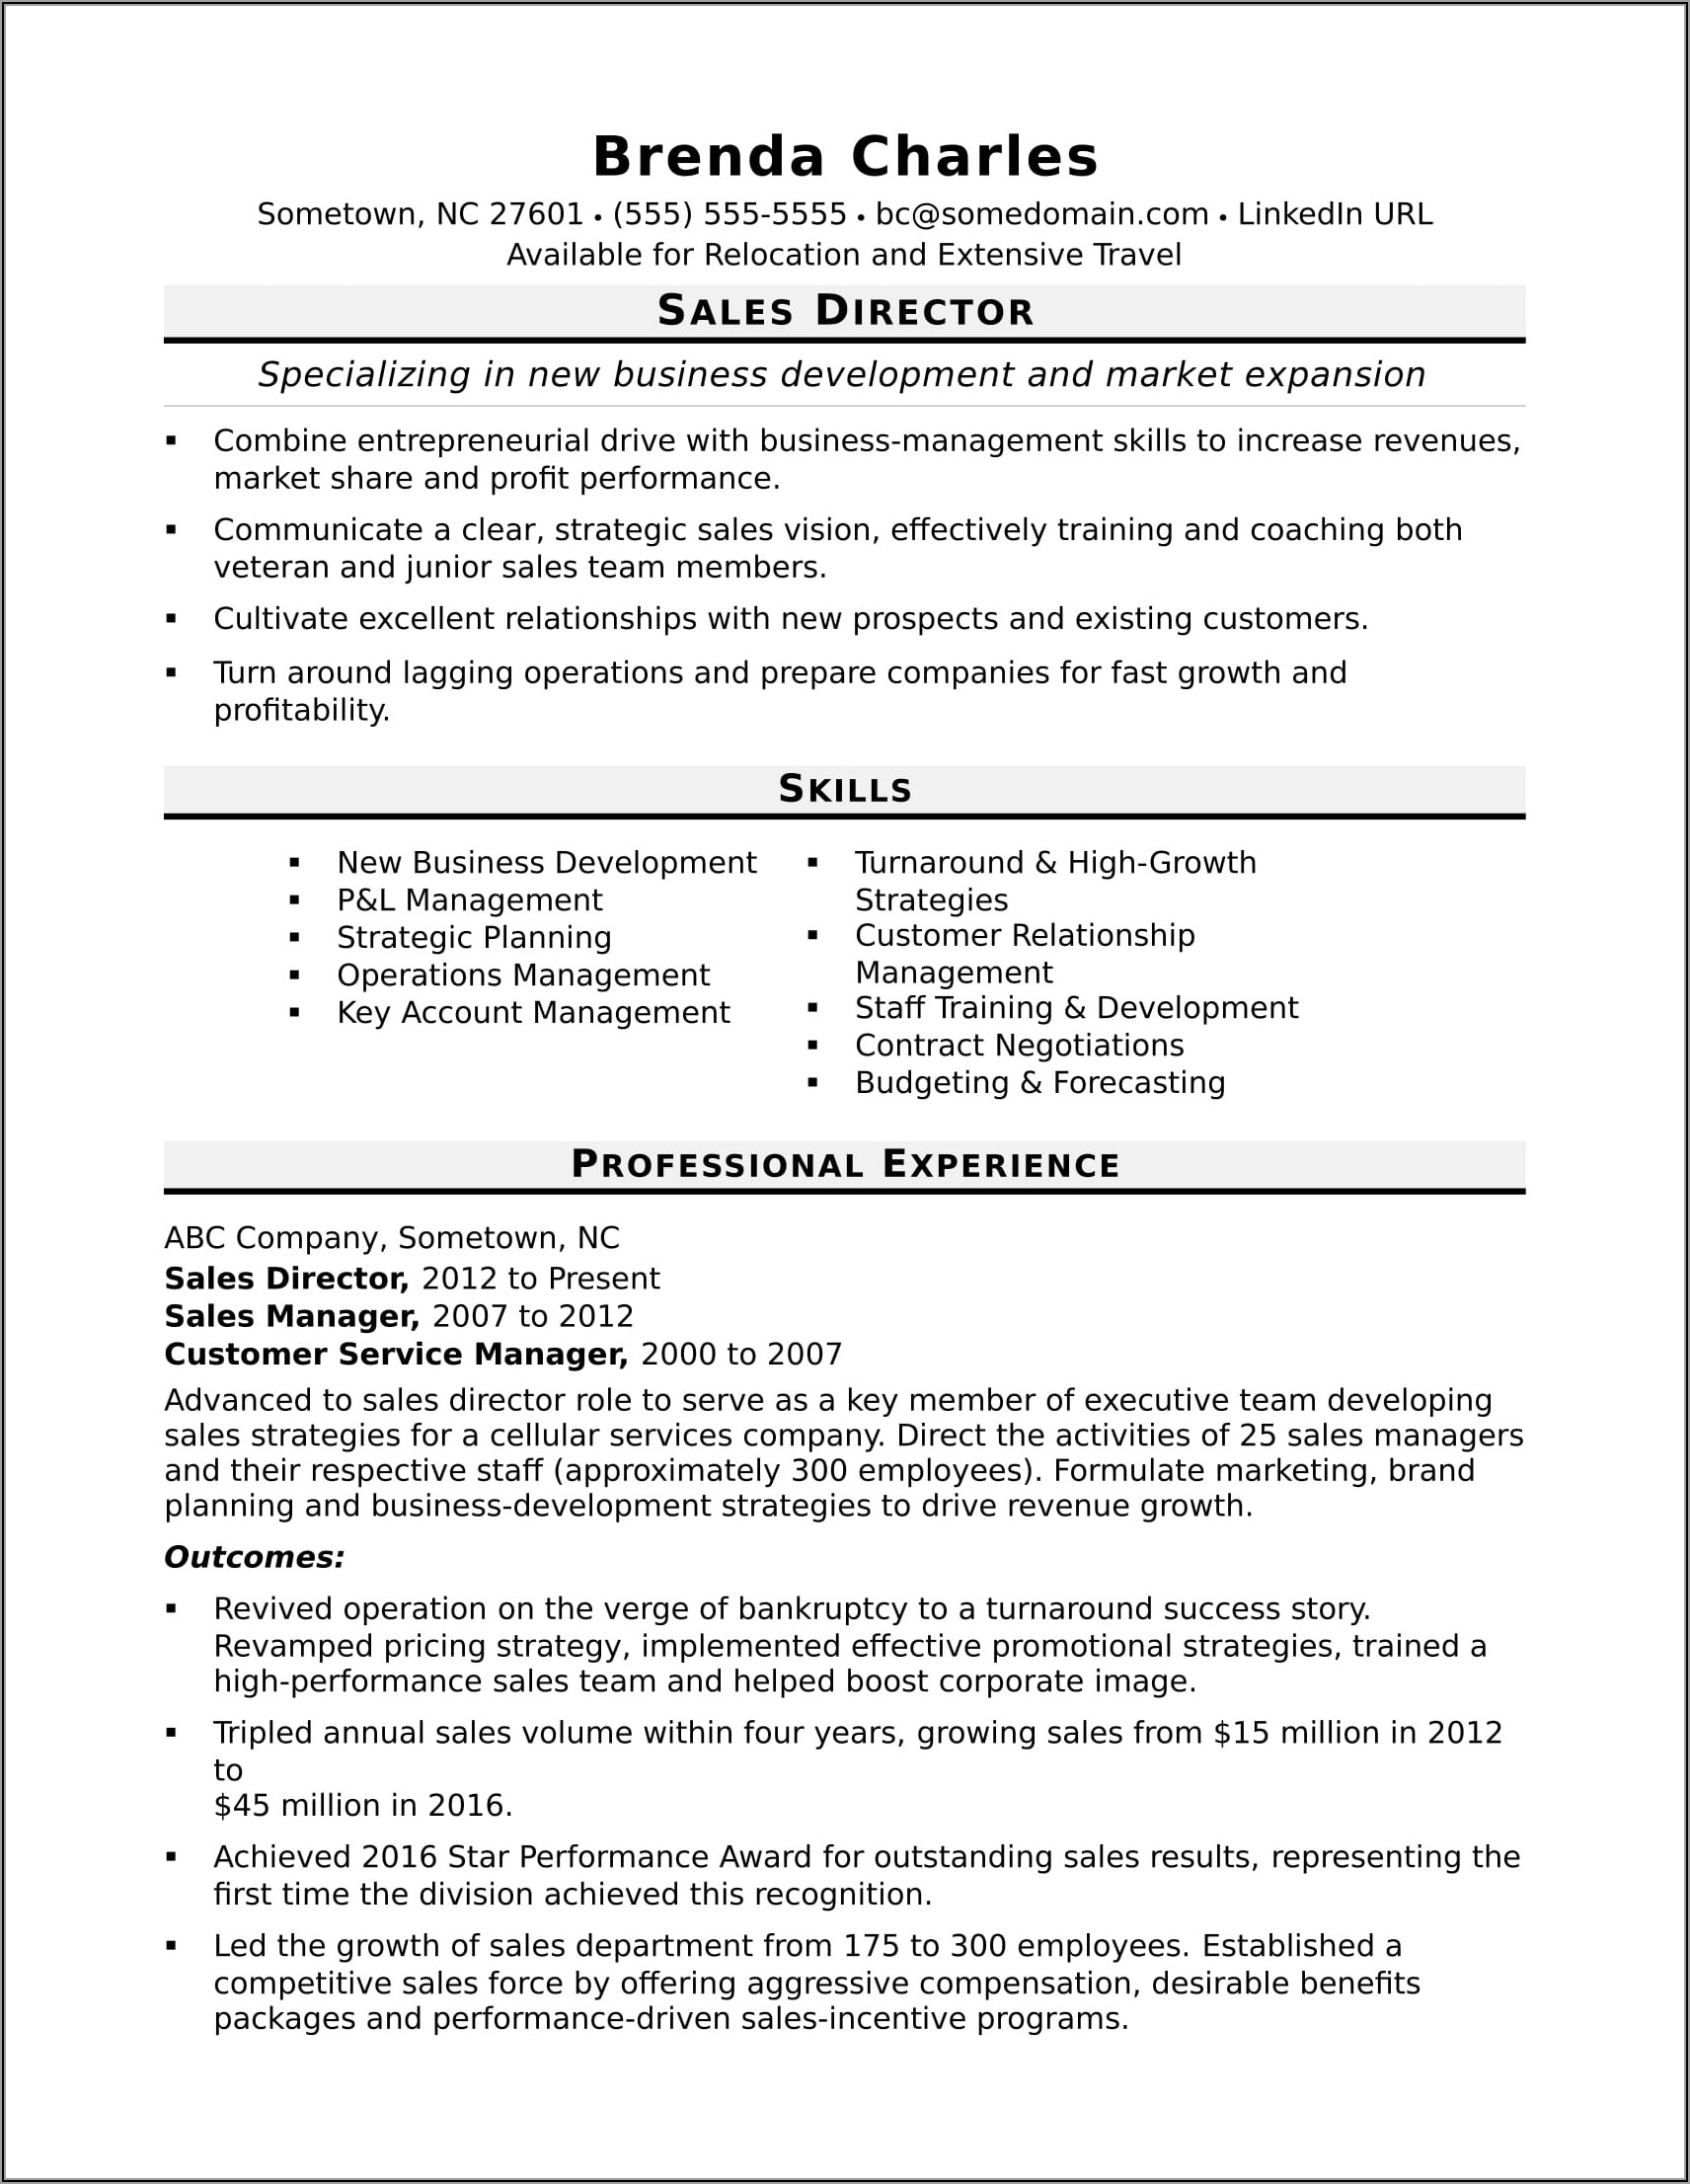 Sales Manager Resume Word Format